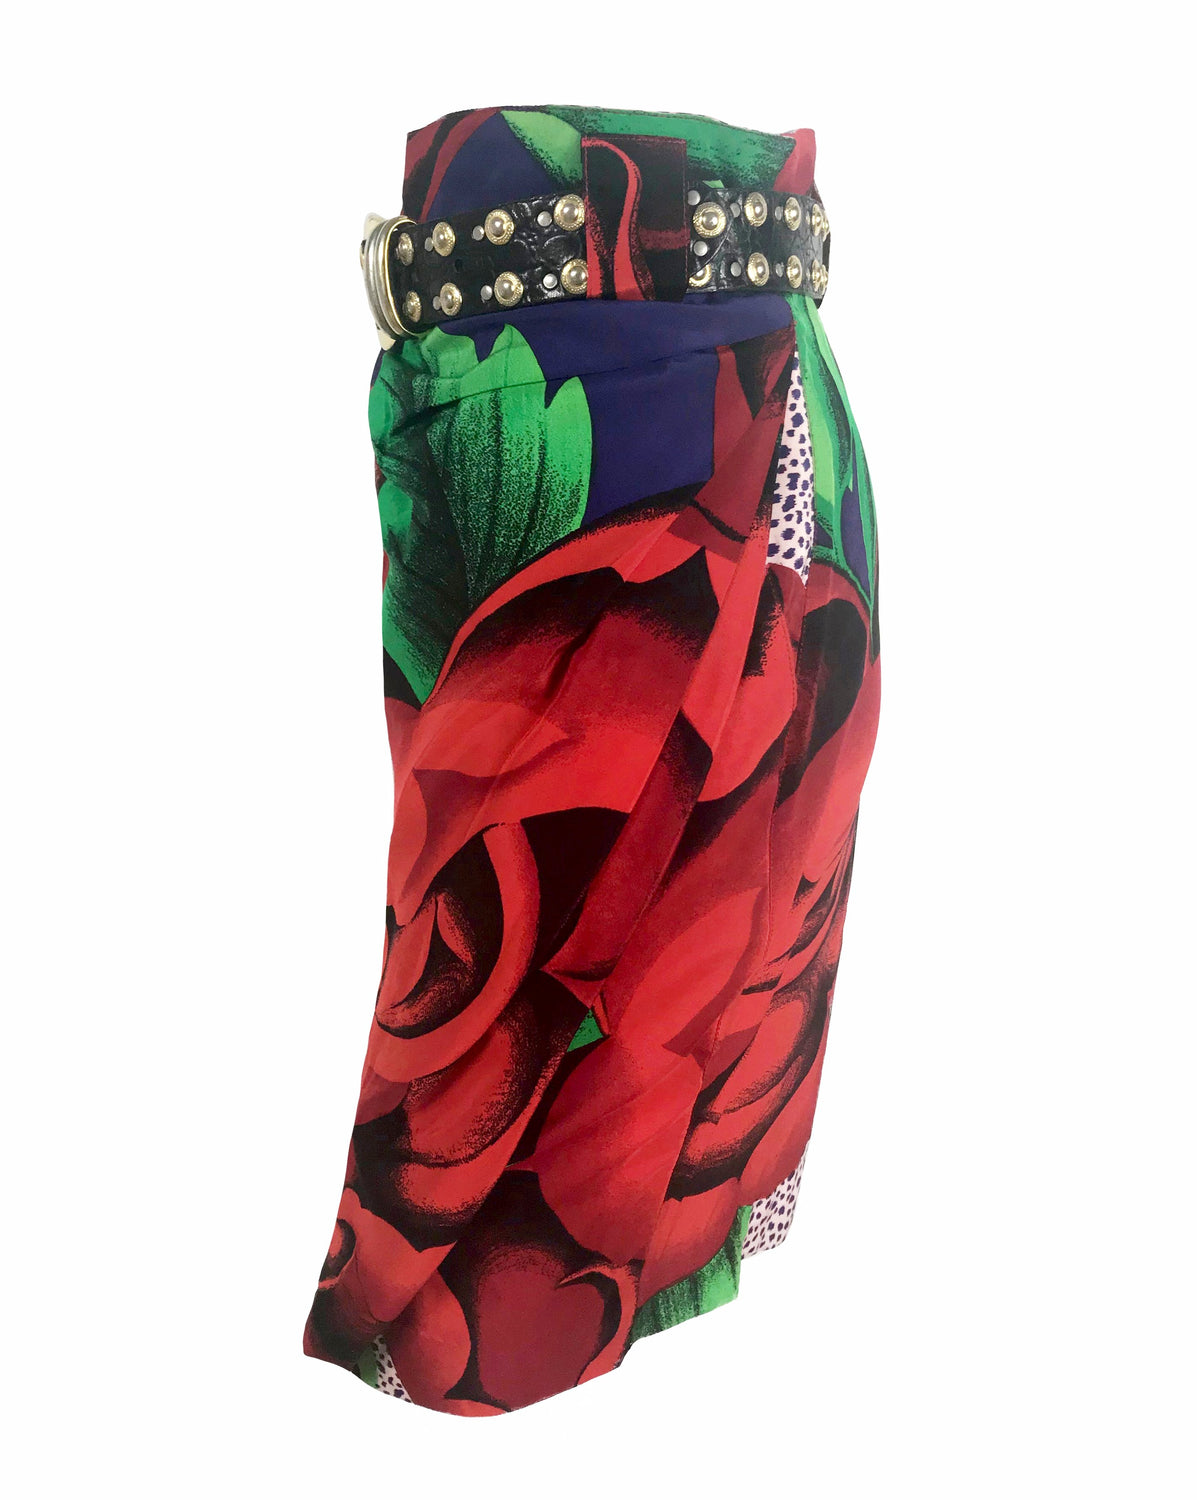 FRUIT Vintage Gianni Versace floral skorts feature a draped skirt front and classic short design at rear.